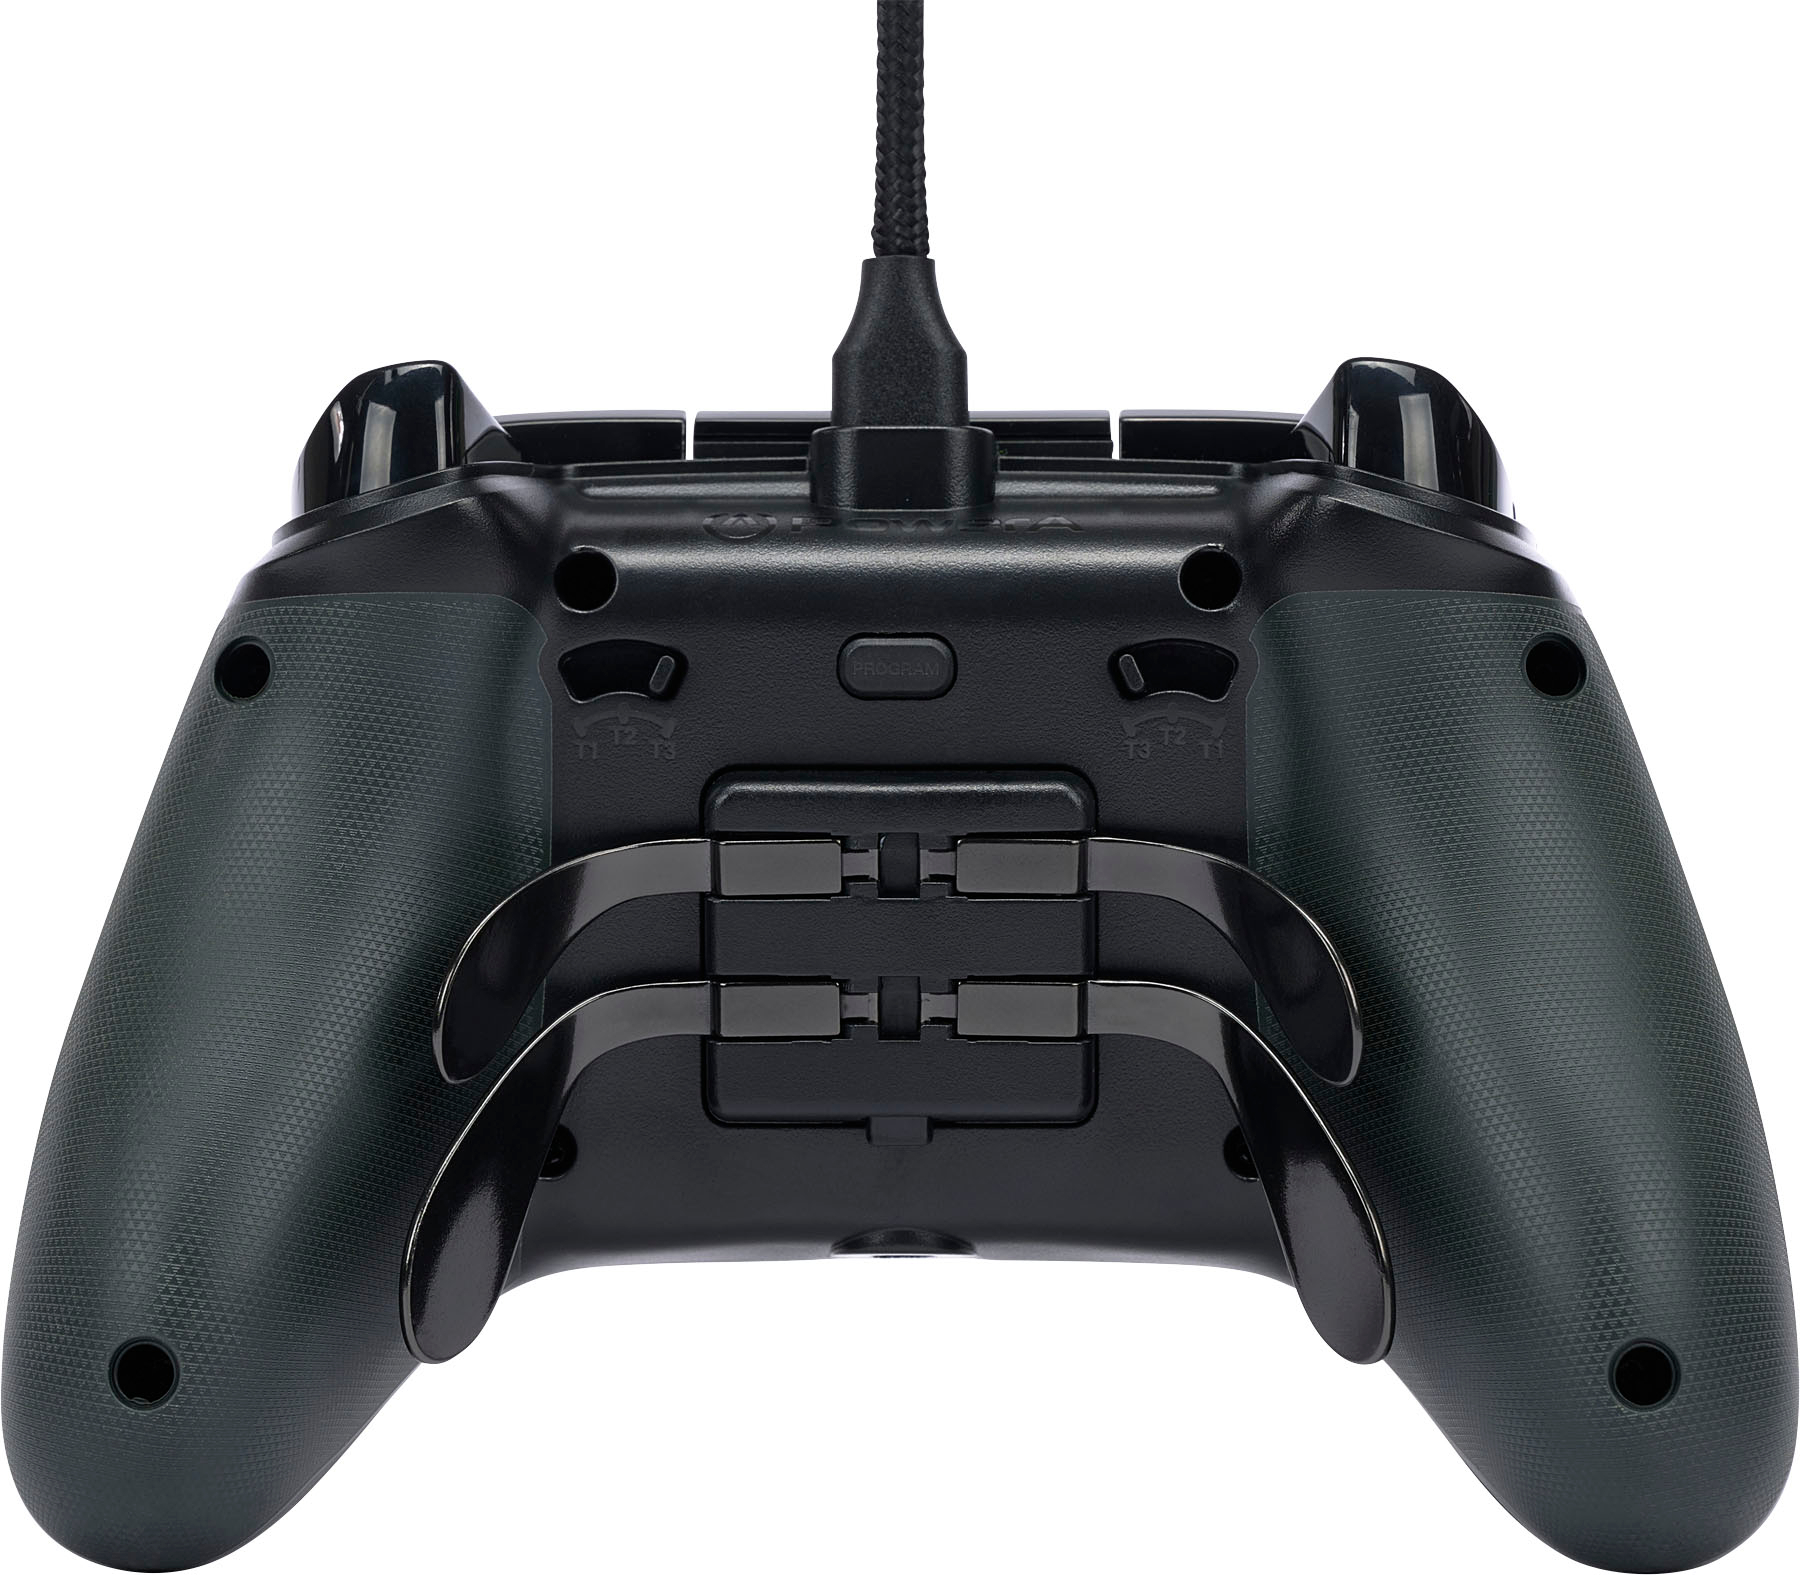 Back View: KontrolFreek - FPS Freek Inferno 4 Prong Performance Thumbsticks for PS5 and PS4